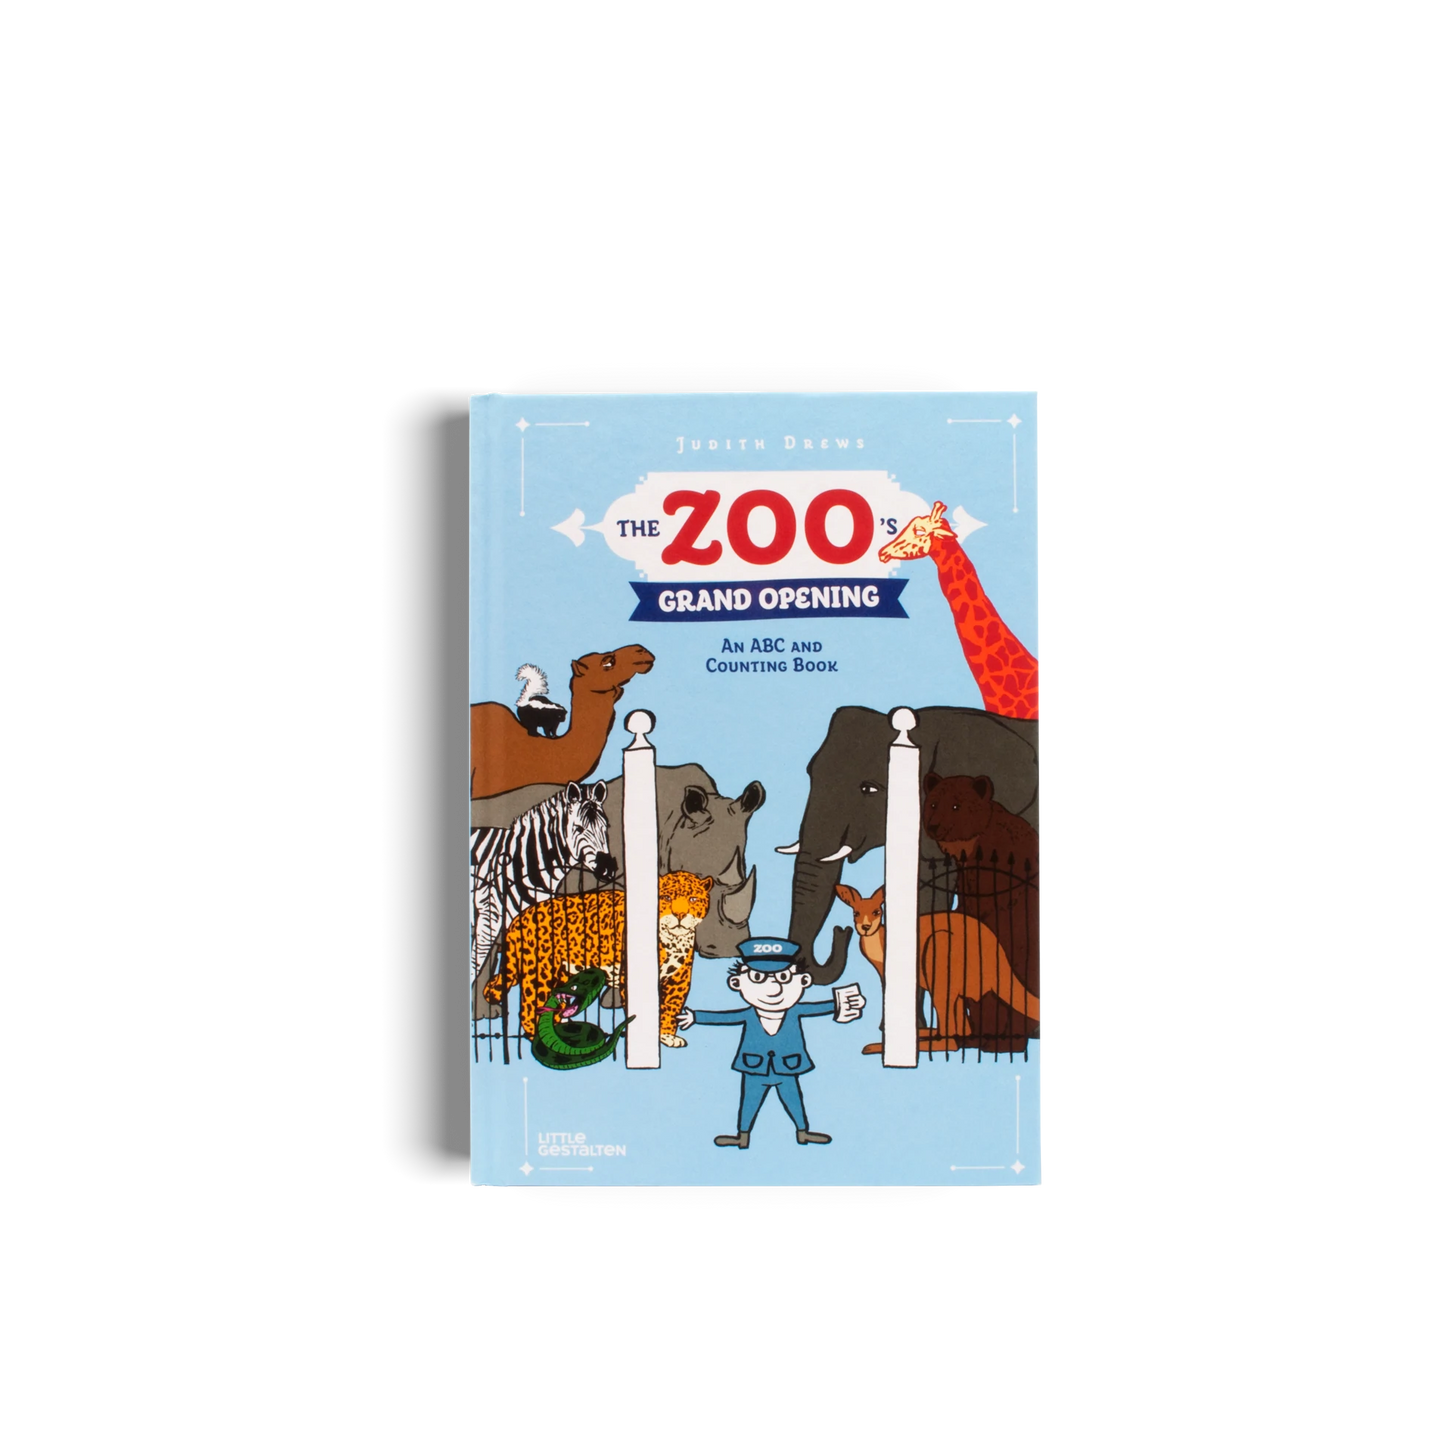 The Zoo’s Grand Opening - An ABC and counting book